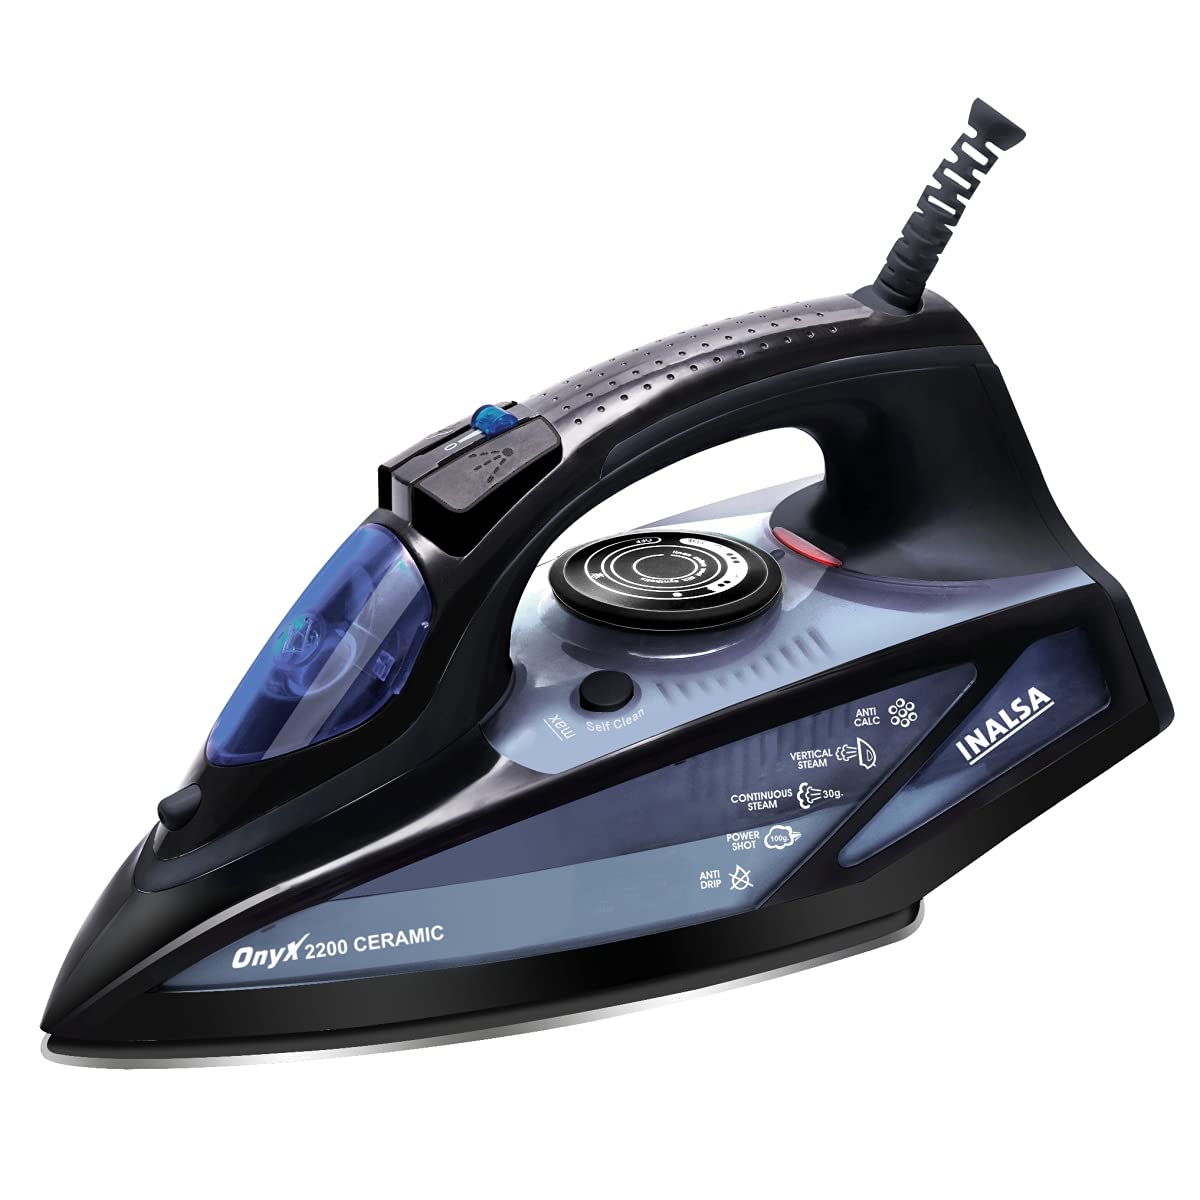 inalsa-steam-iron-onyx-2200-best-steam-irons-in-india